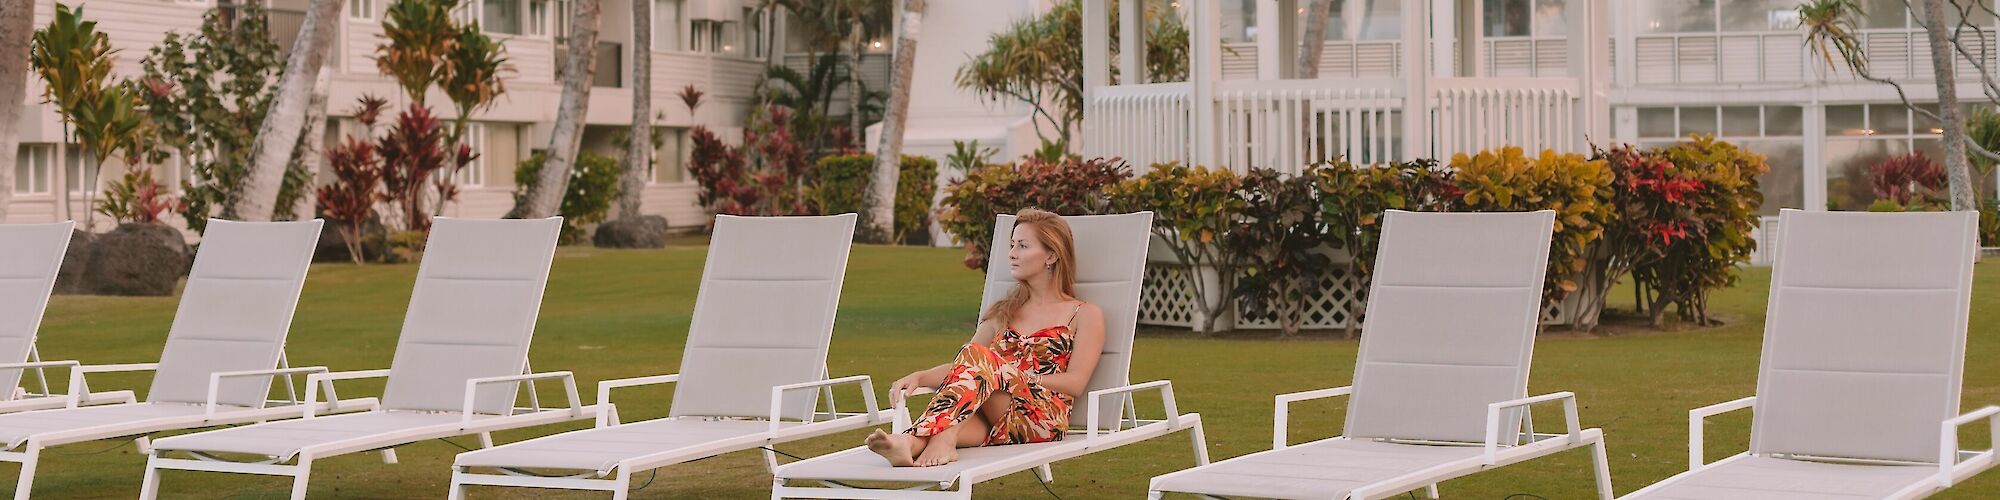 A woman in a floral dress is lounging on a white chair, surrounded by empty chairs in a garden with a gazebo and a building in the background.